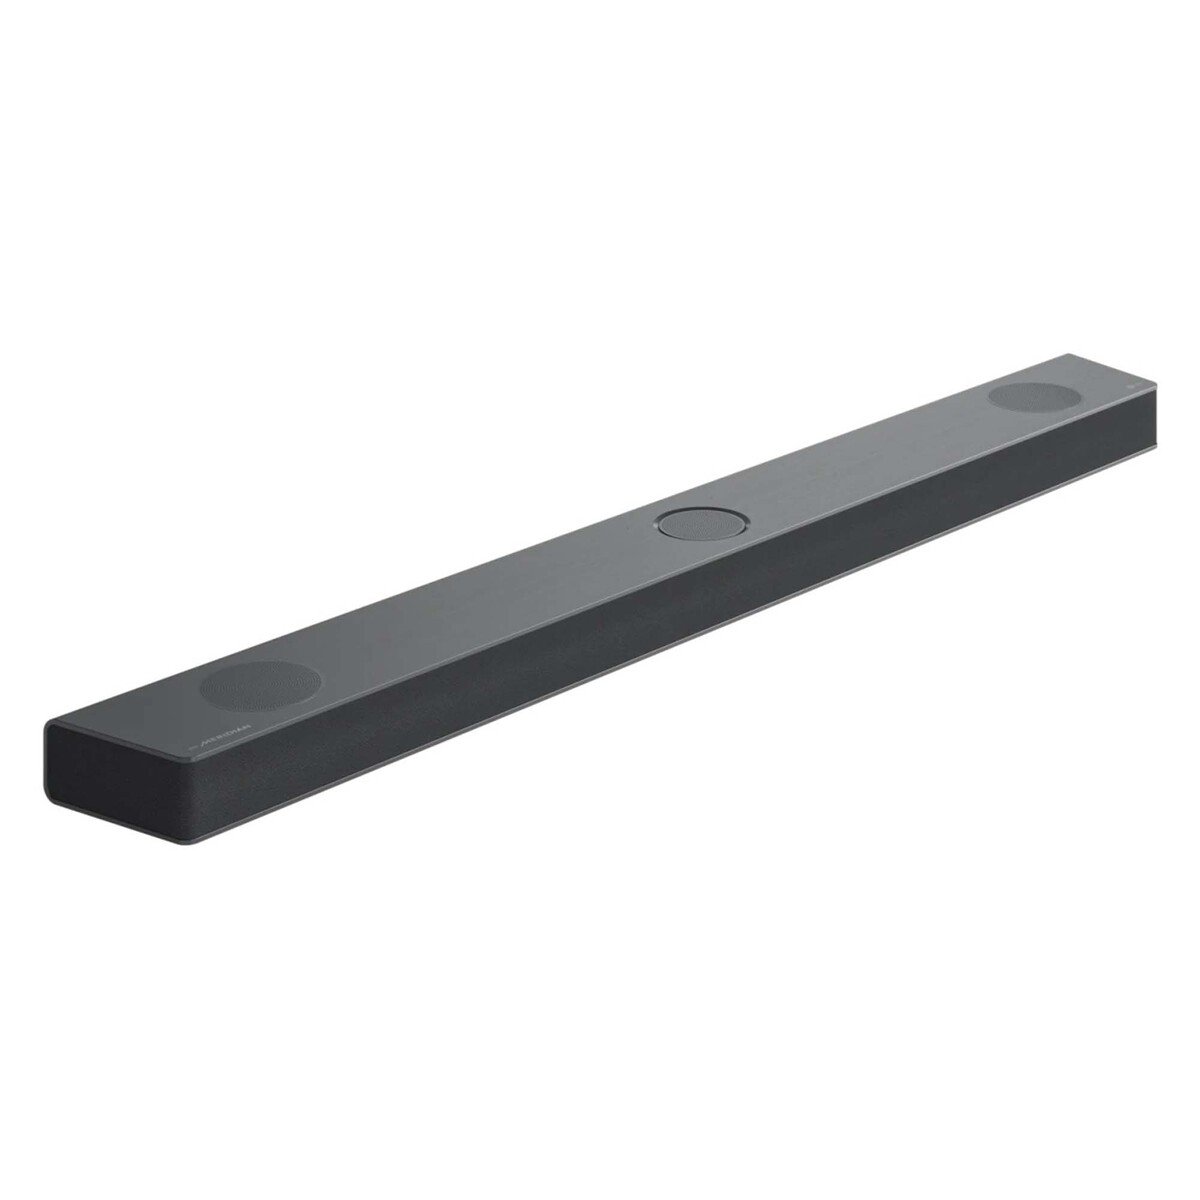 LG 9.1.5 ch Sound Bar with Dolby Atmos and Surround Speakers, 810 W, Black, S95QR